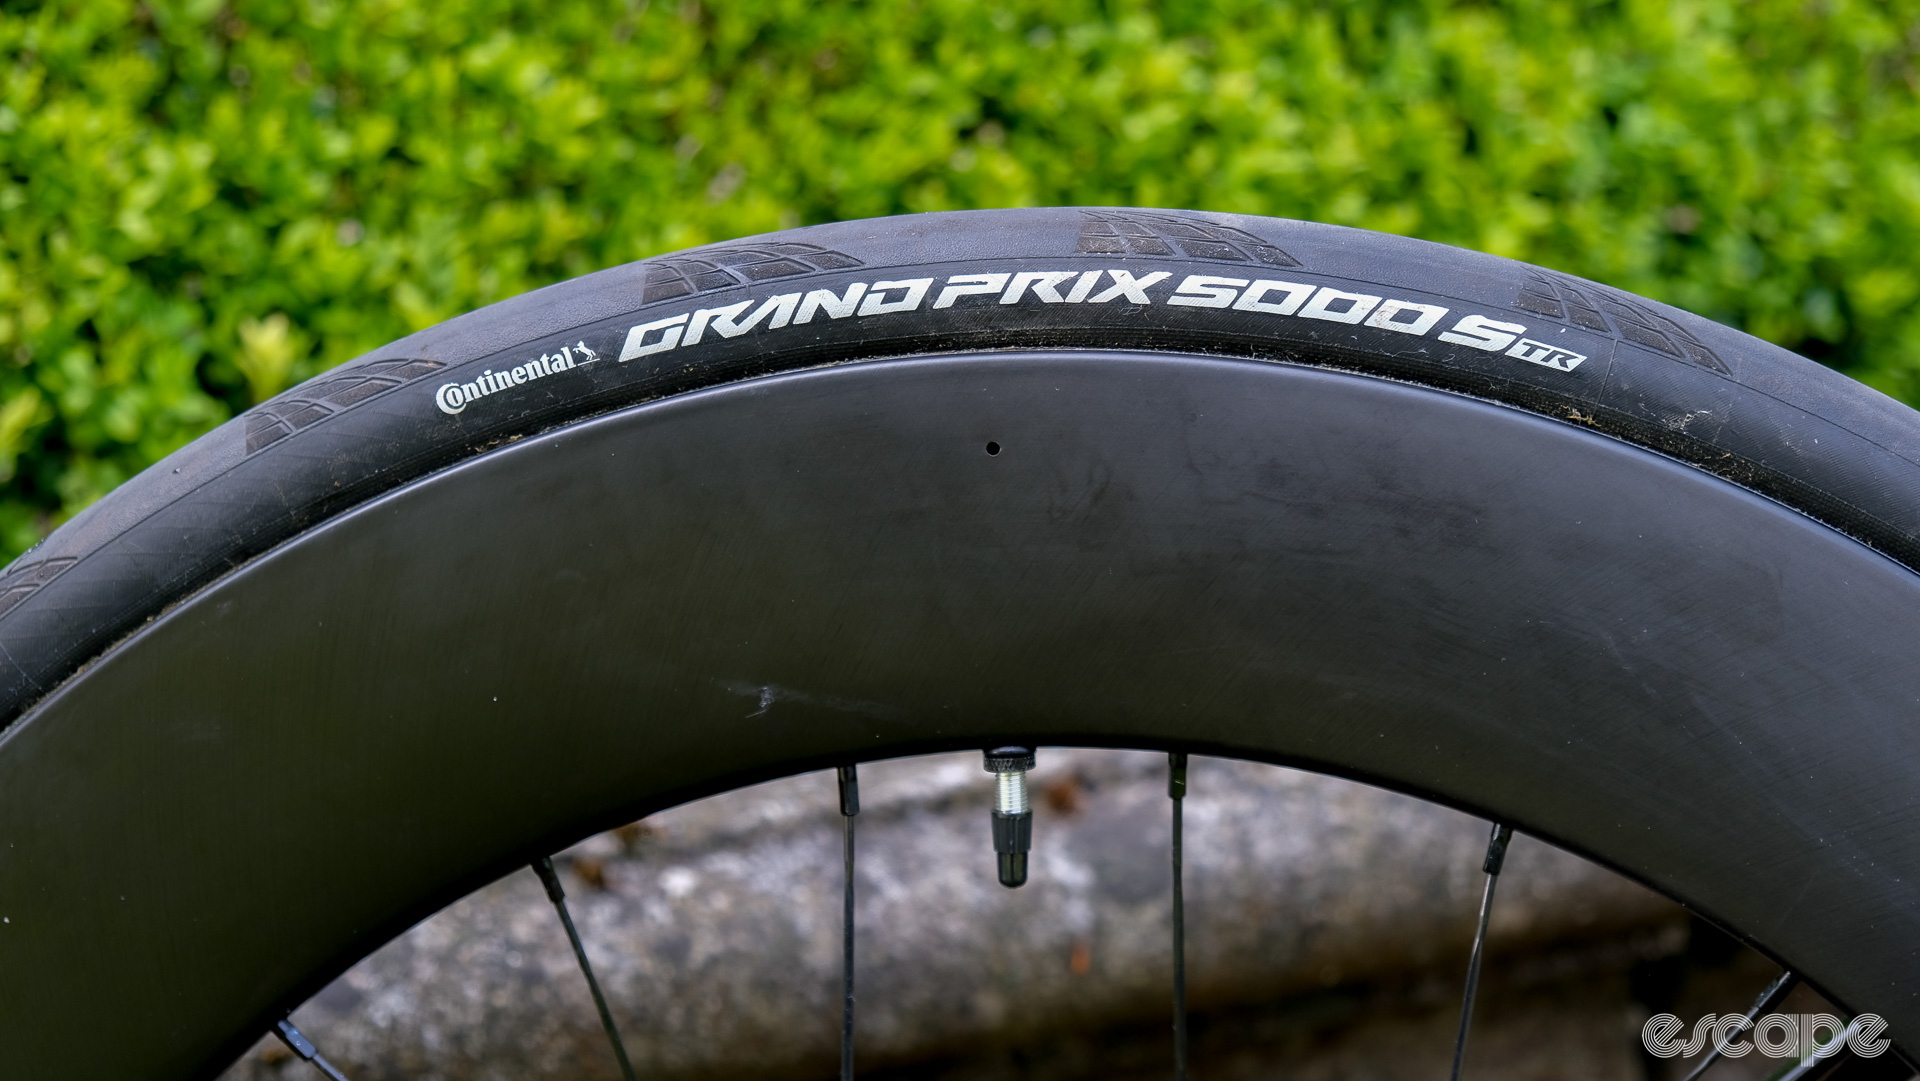 The Parcours wheelset featuring Continental Grand Prix 5000 TR tires.